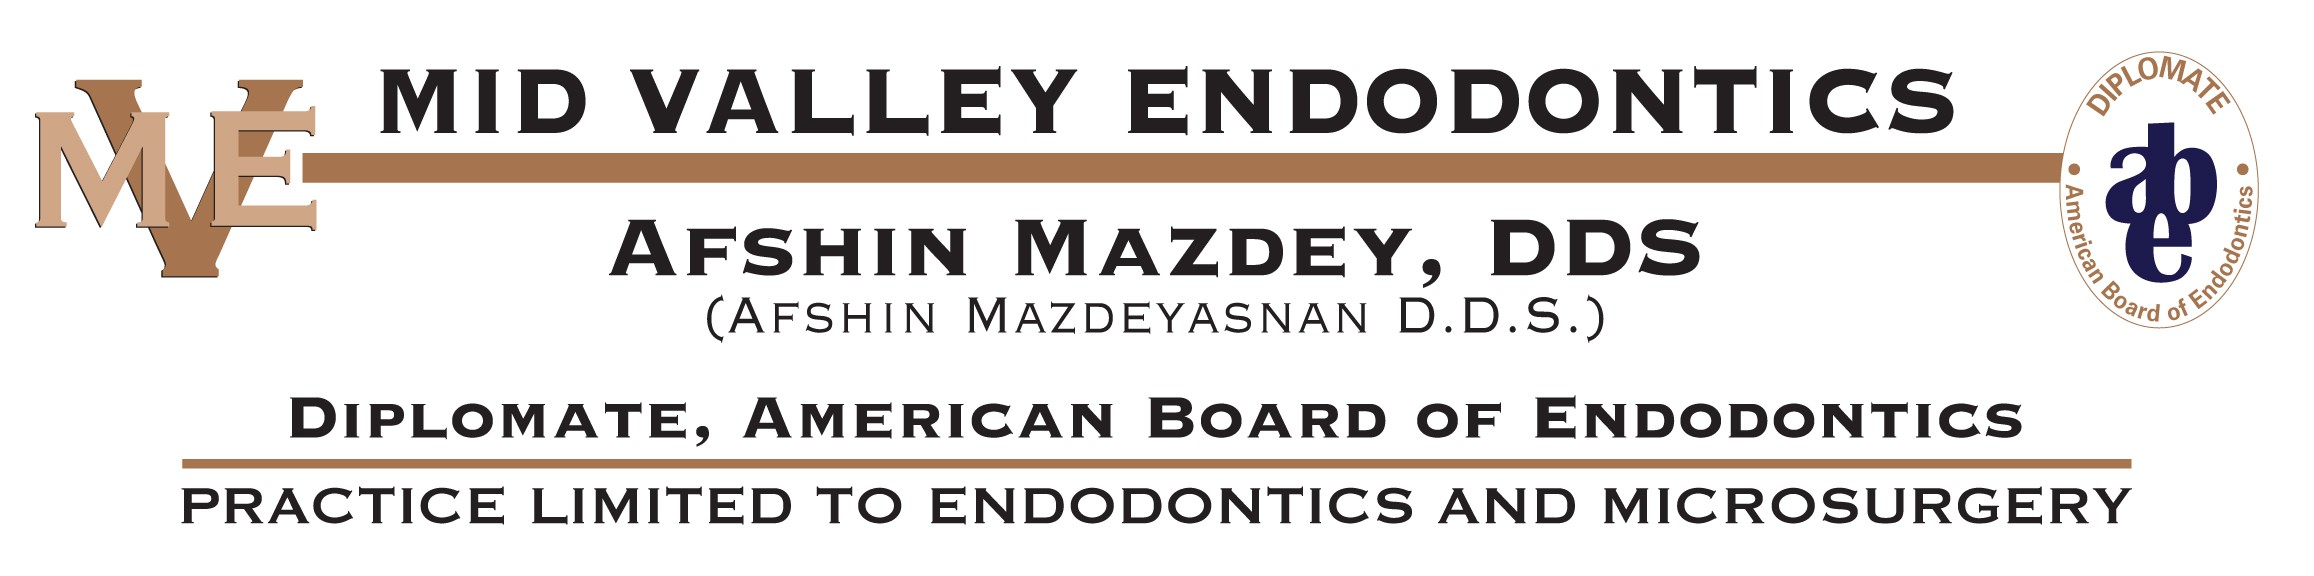 Link to Mid Valley Endodontics home page